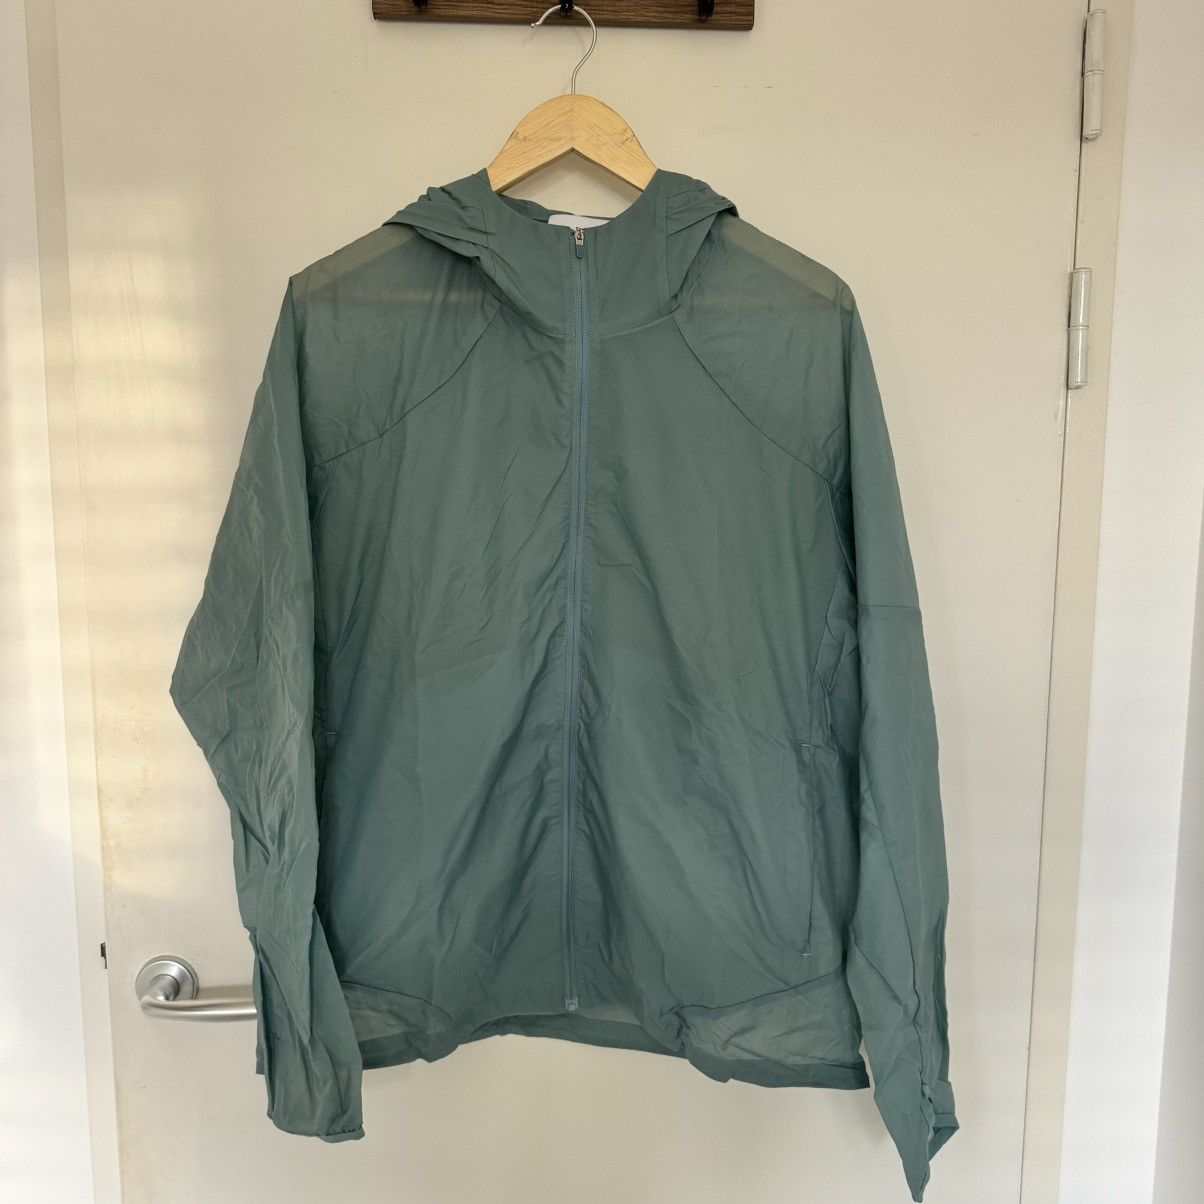 POST ARCHIVE FACTION (PAF) Post Archive Faction (PAF) 5.0 Technical Jacket  Right | Grailed